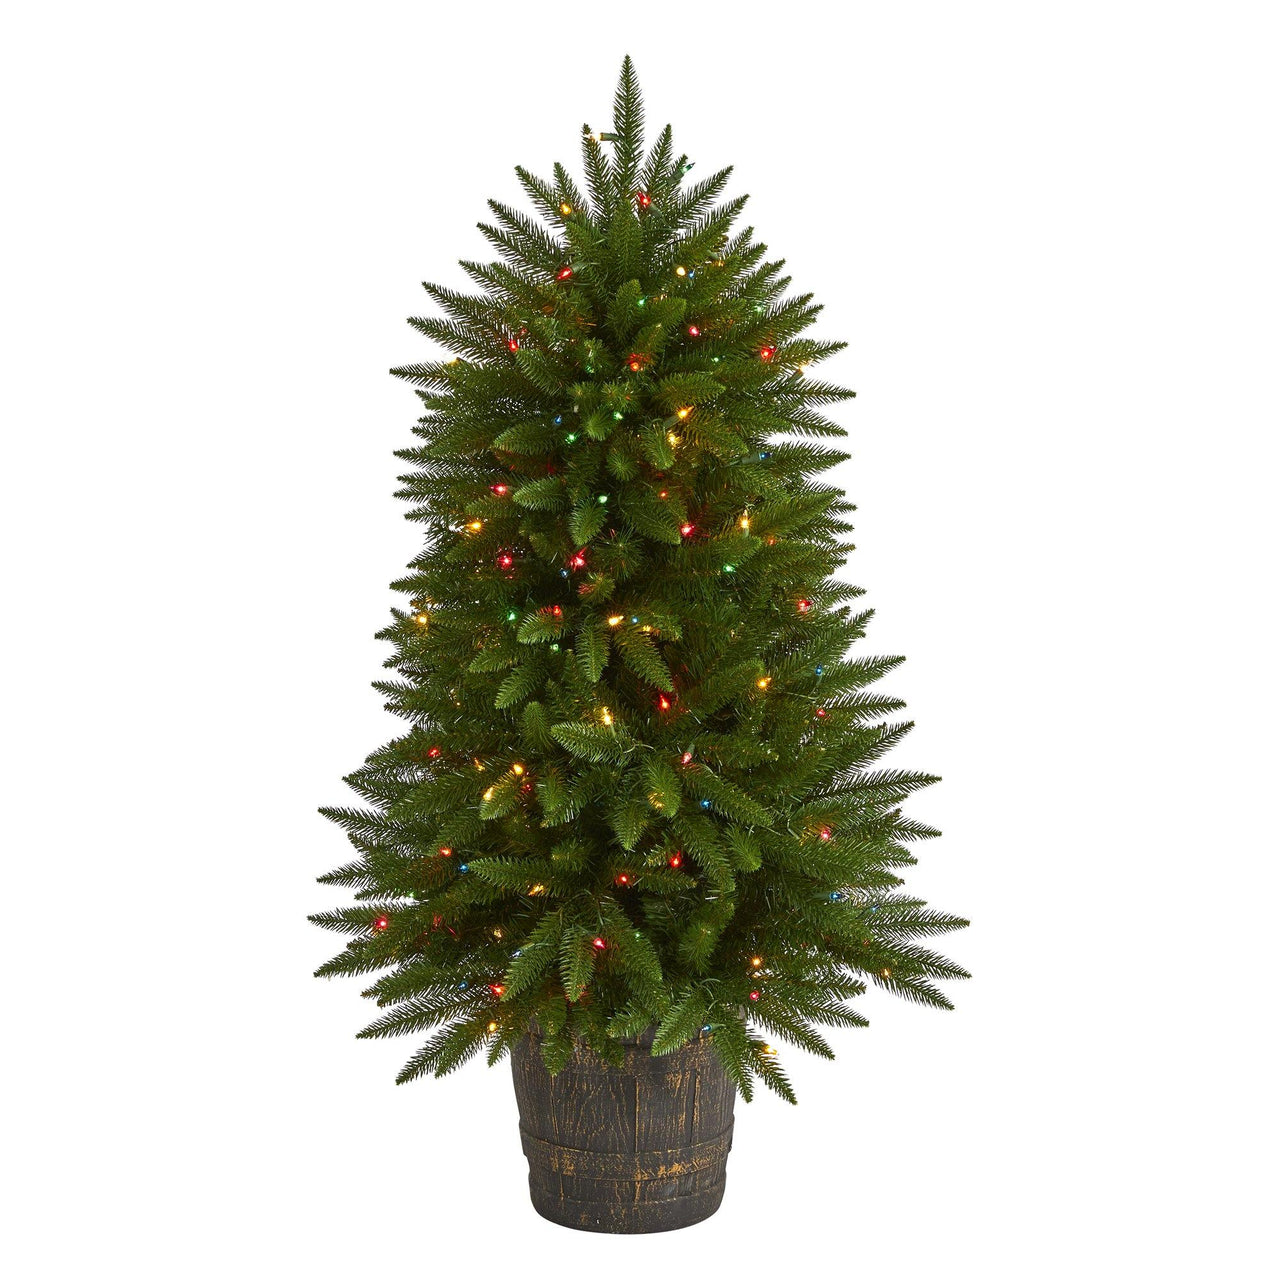 5' Sierra Fir Artificial Christmas Tree with 200 Multicolored Lights and 428 Bendable Branches in Decorative Container